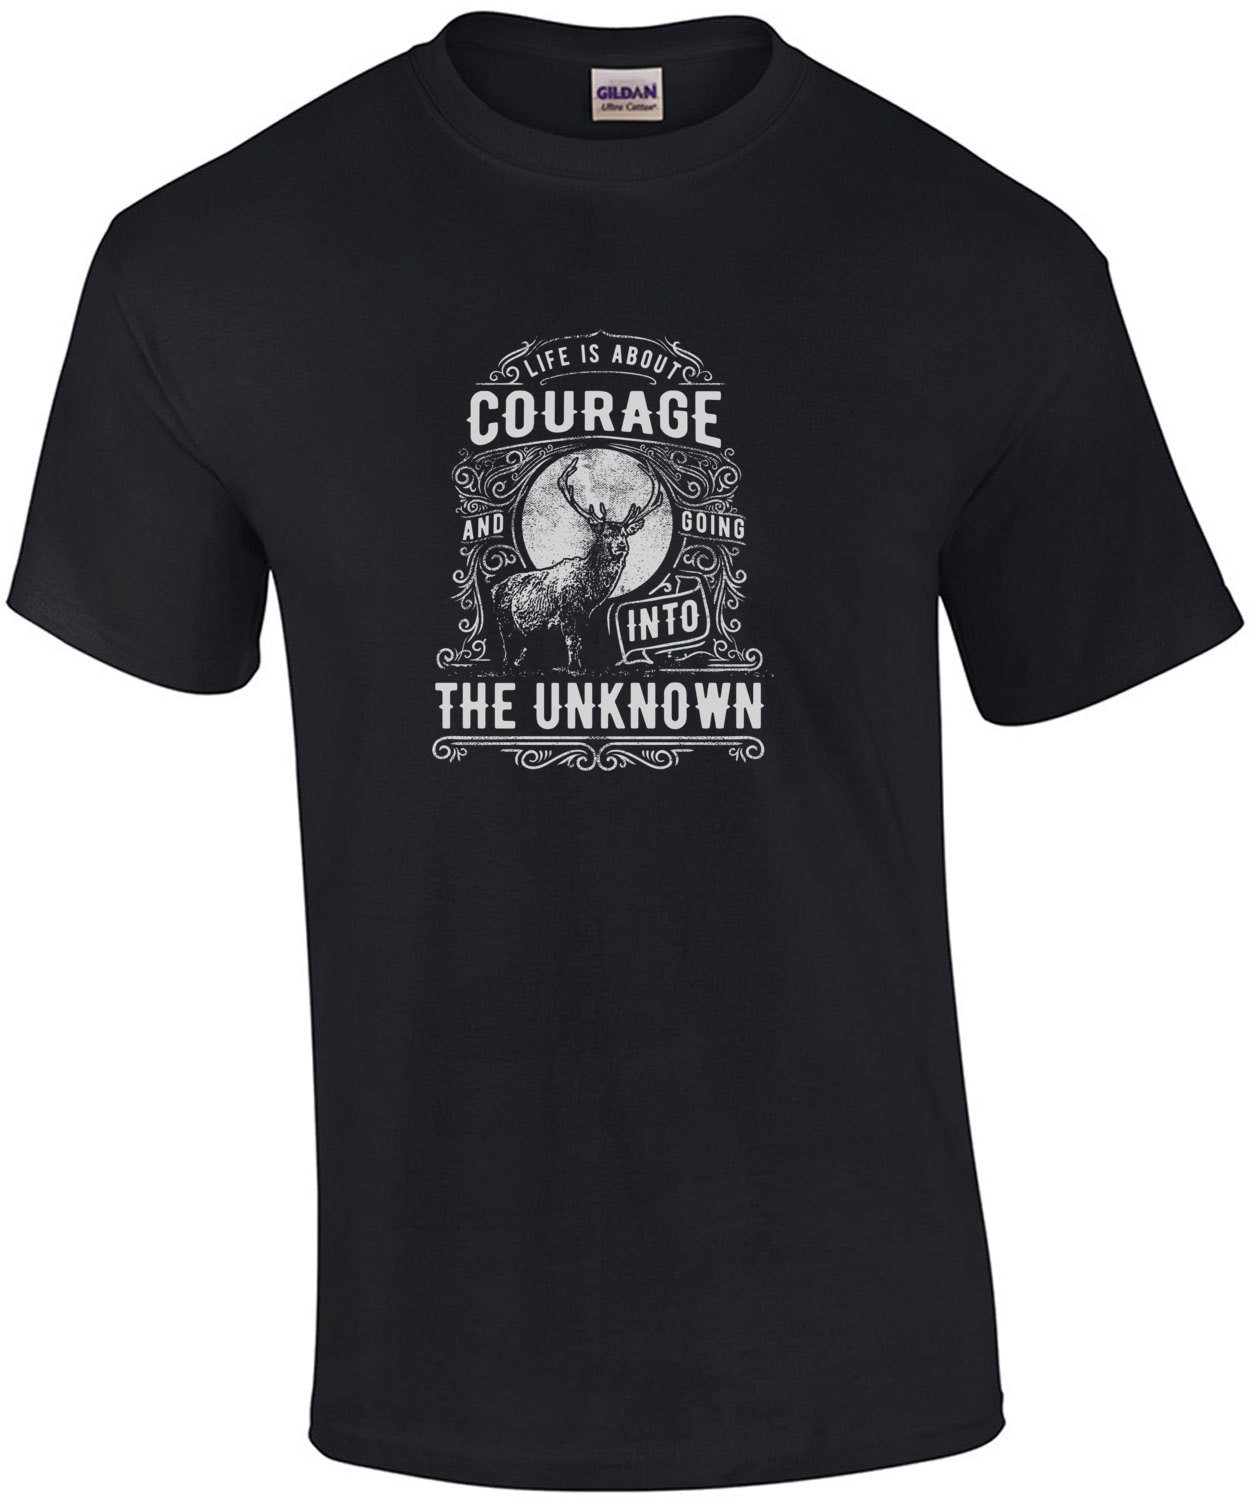 Life Is About Courage And Goting Into The Unknown T-Shirt